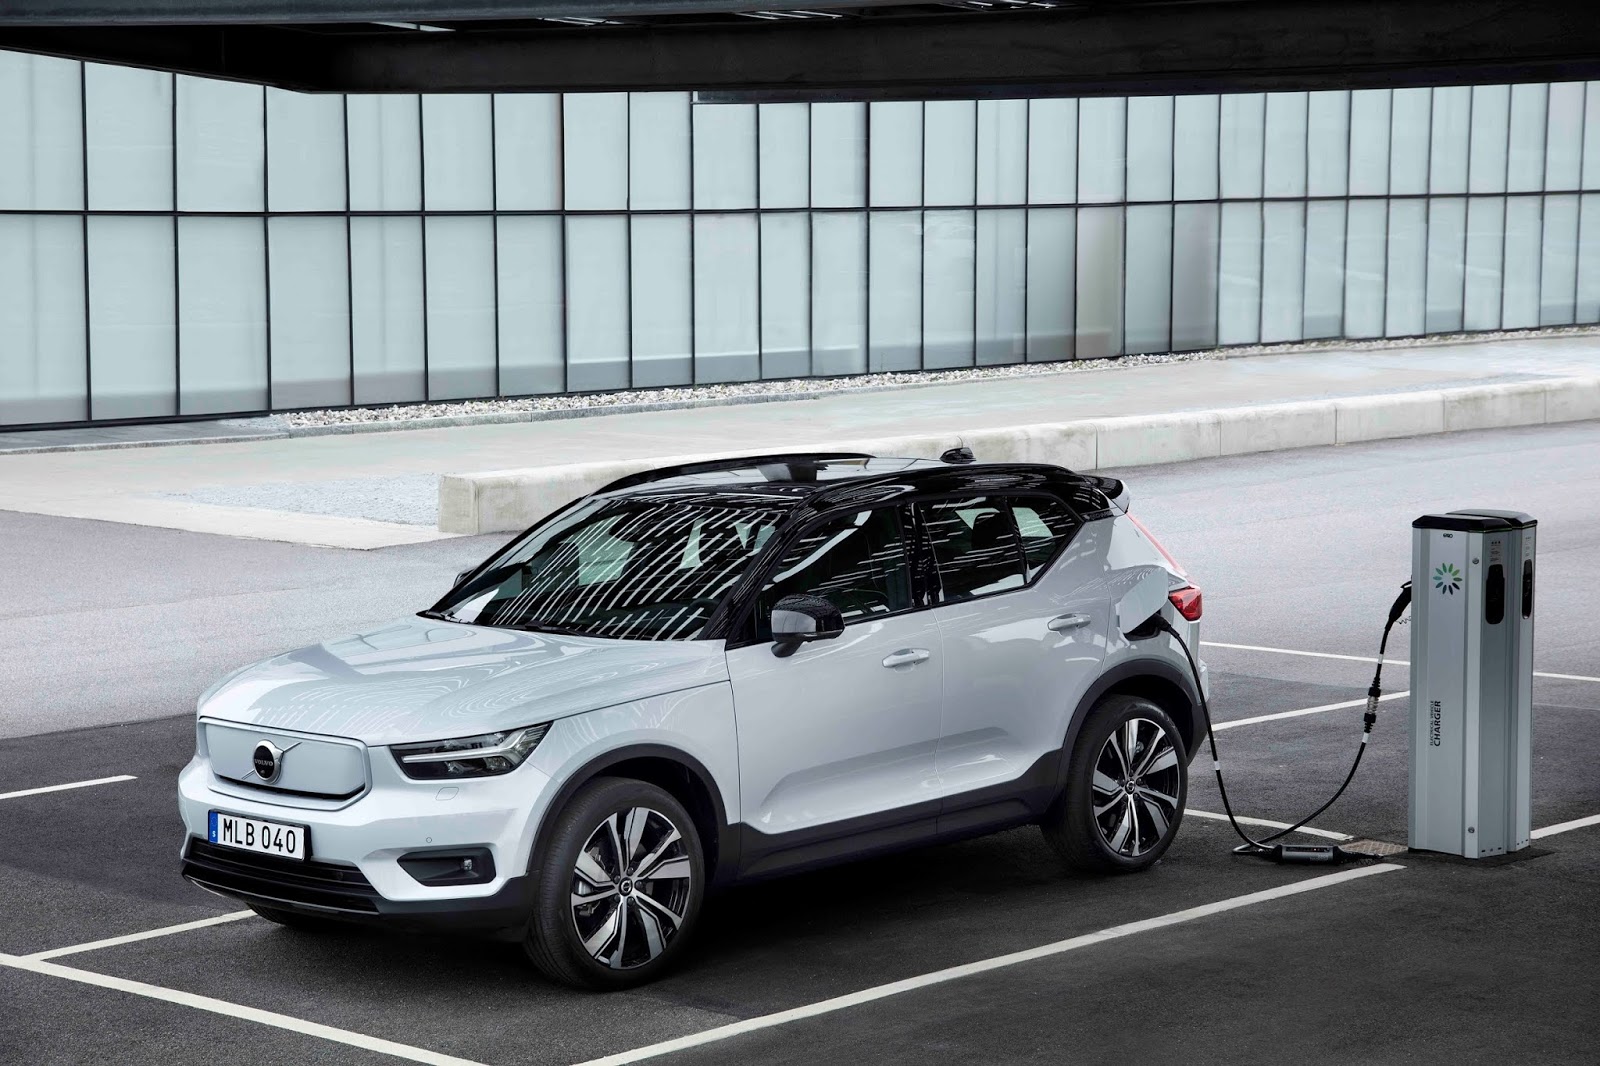 271709 Volvo XC40 Recharge P8 AWD in Glacier Silver Με 408 ίππους το Volvo XC40 Recharge